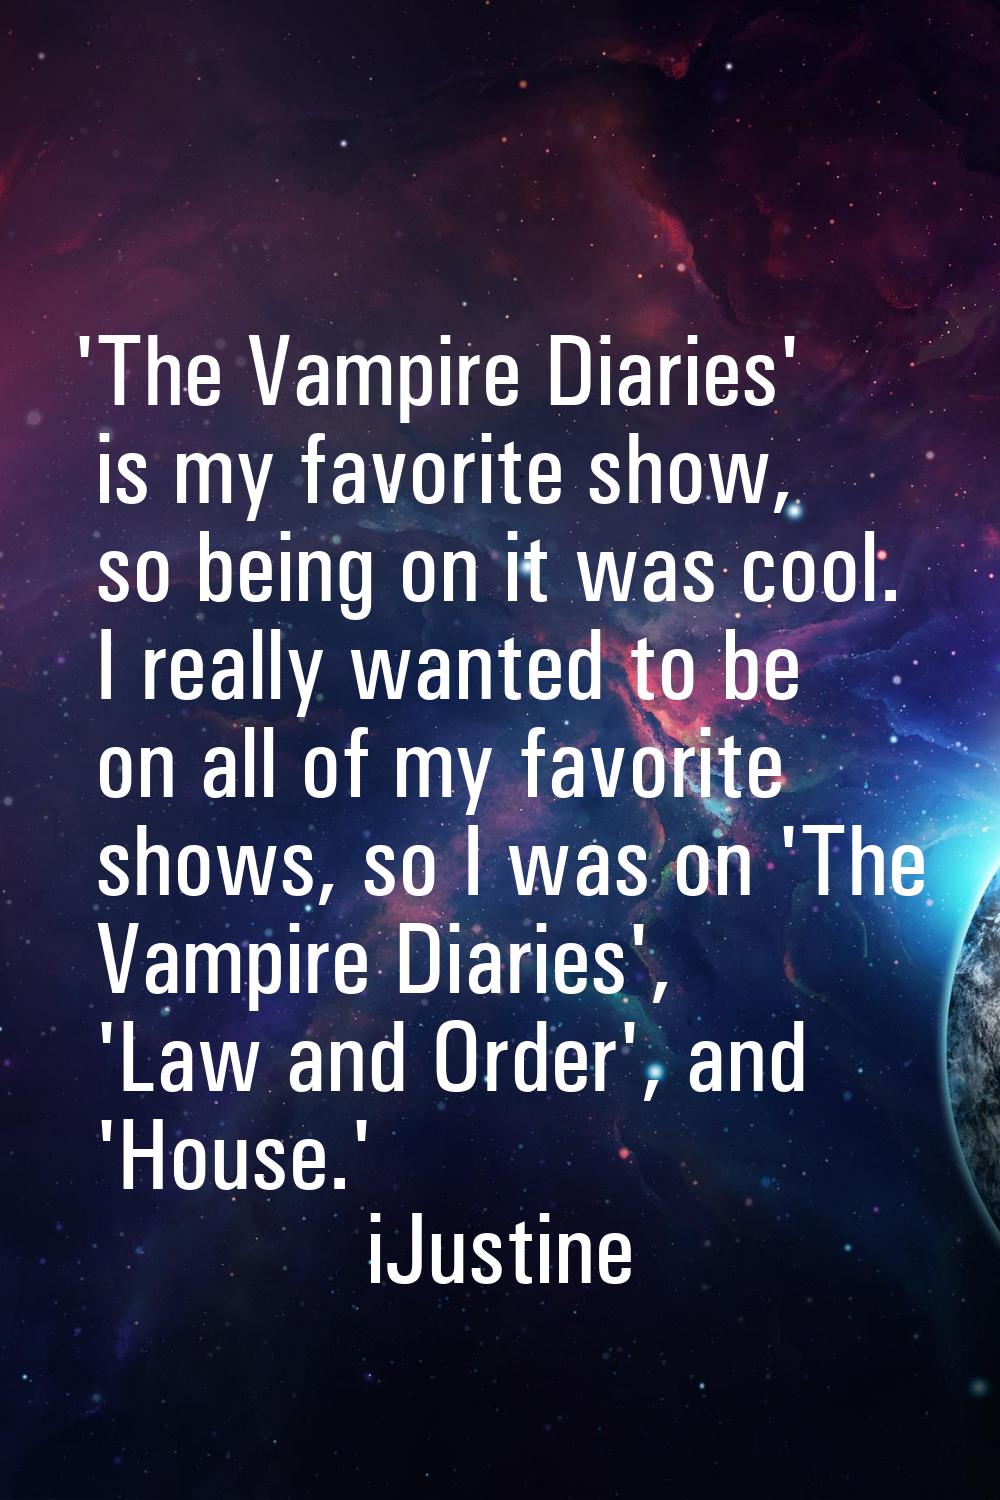 'The Vampire Diaries' is my favorite show, so being on it was cool. I really wanted to be on all of